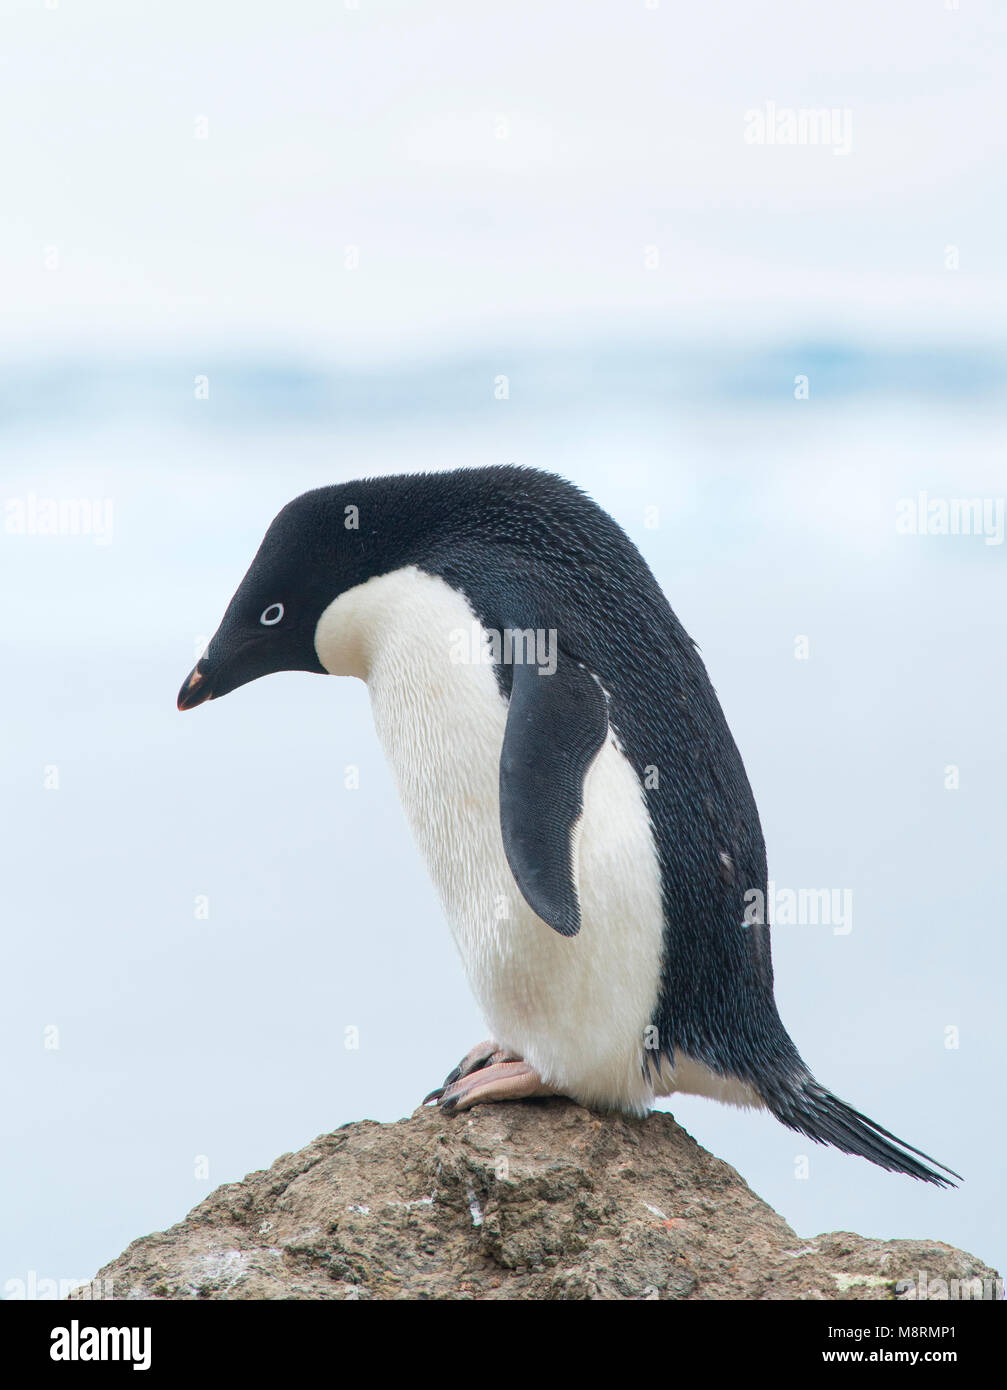 An Adelie penguin stands on top of a rocky shoreline at Brown Bluff, Antarctica. Stock Photo